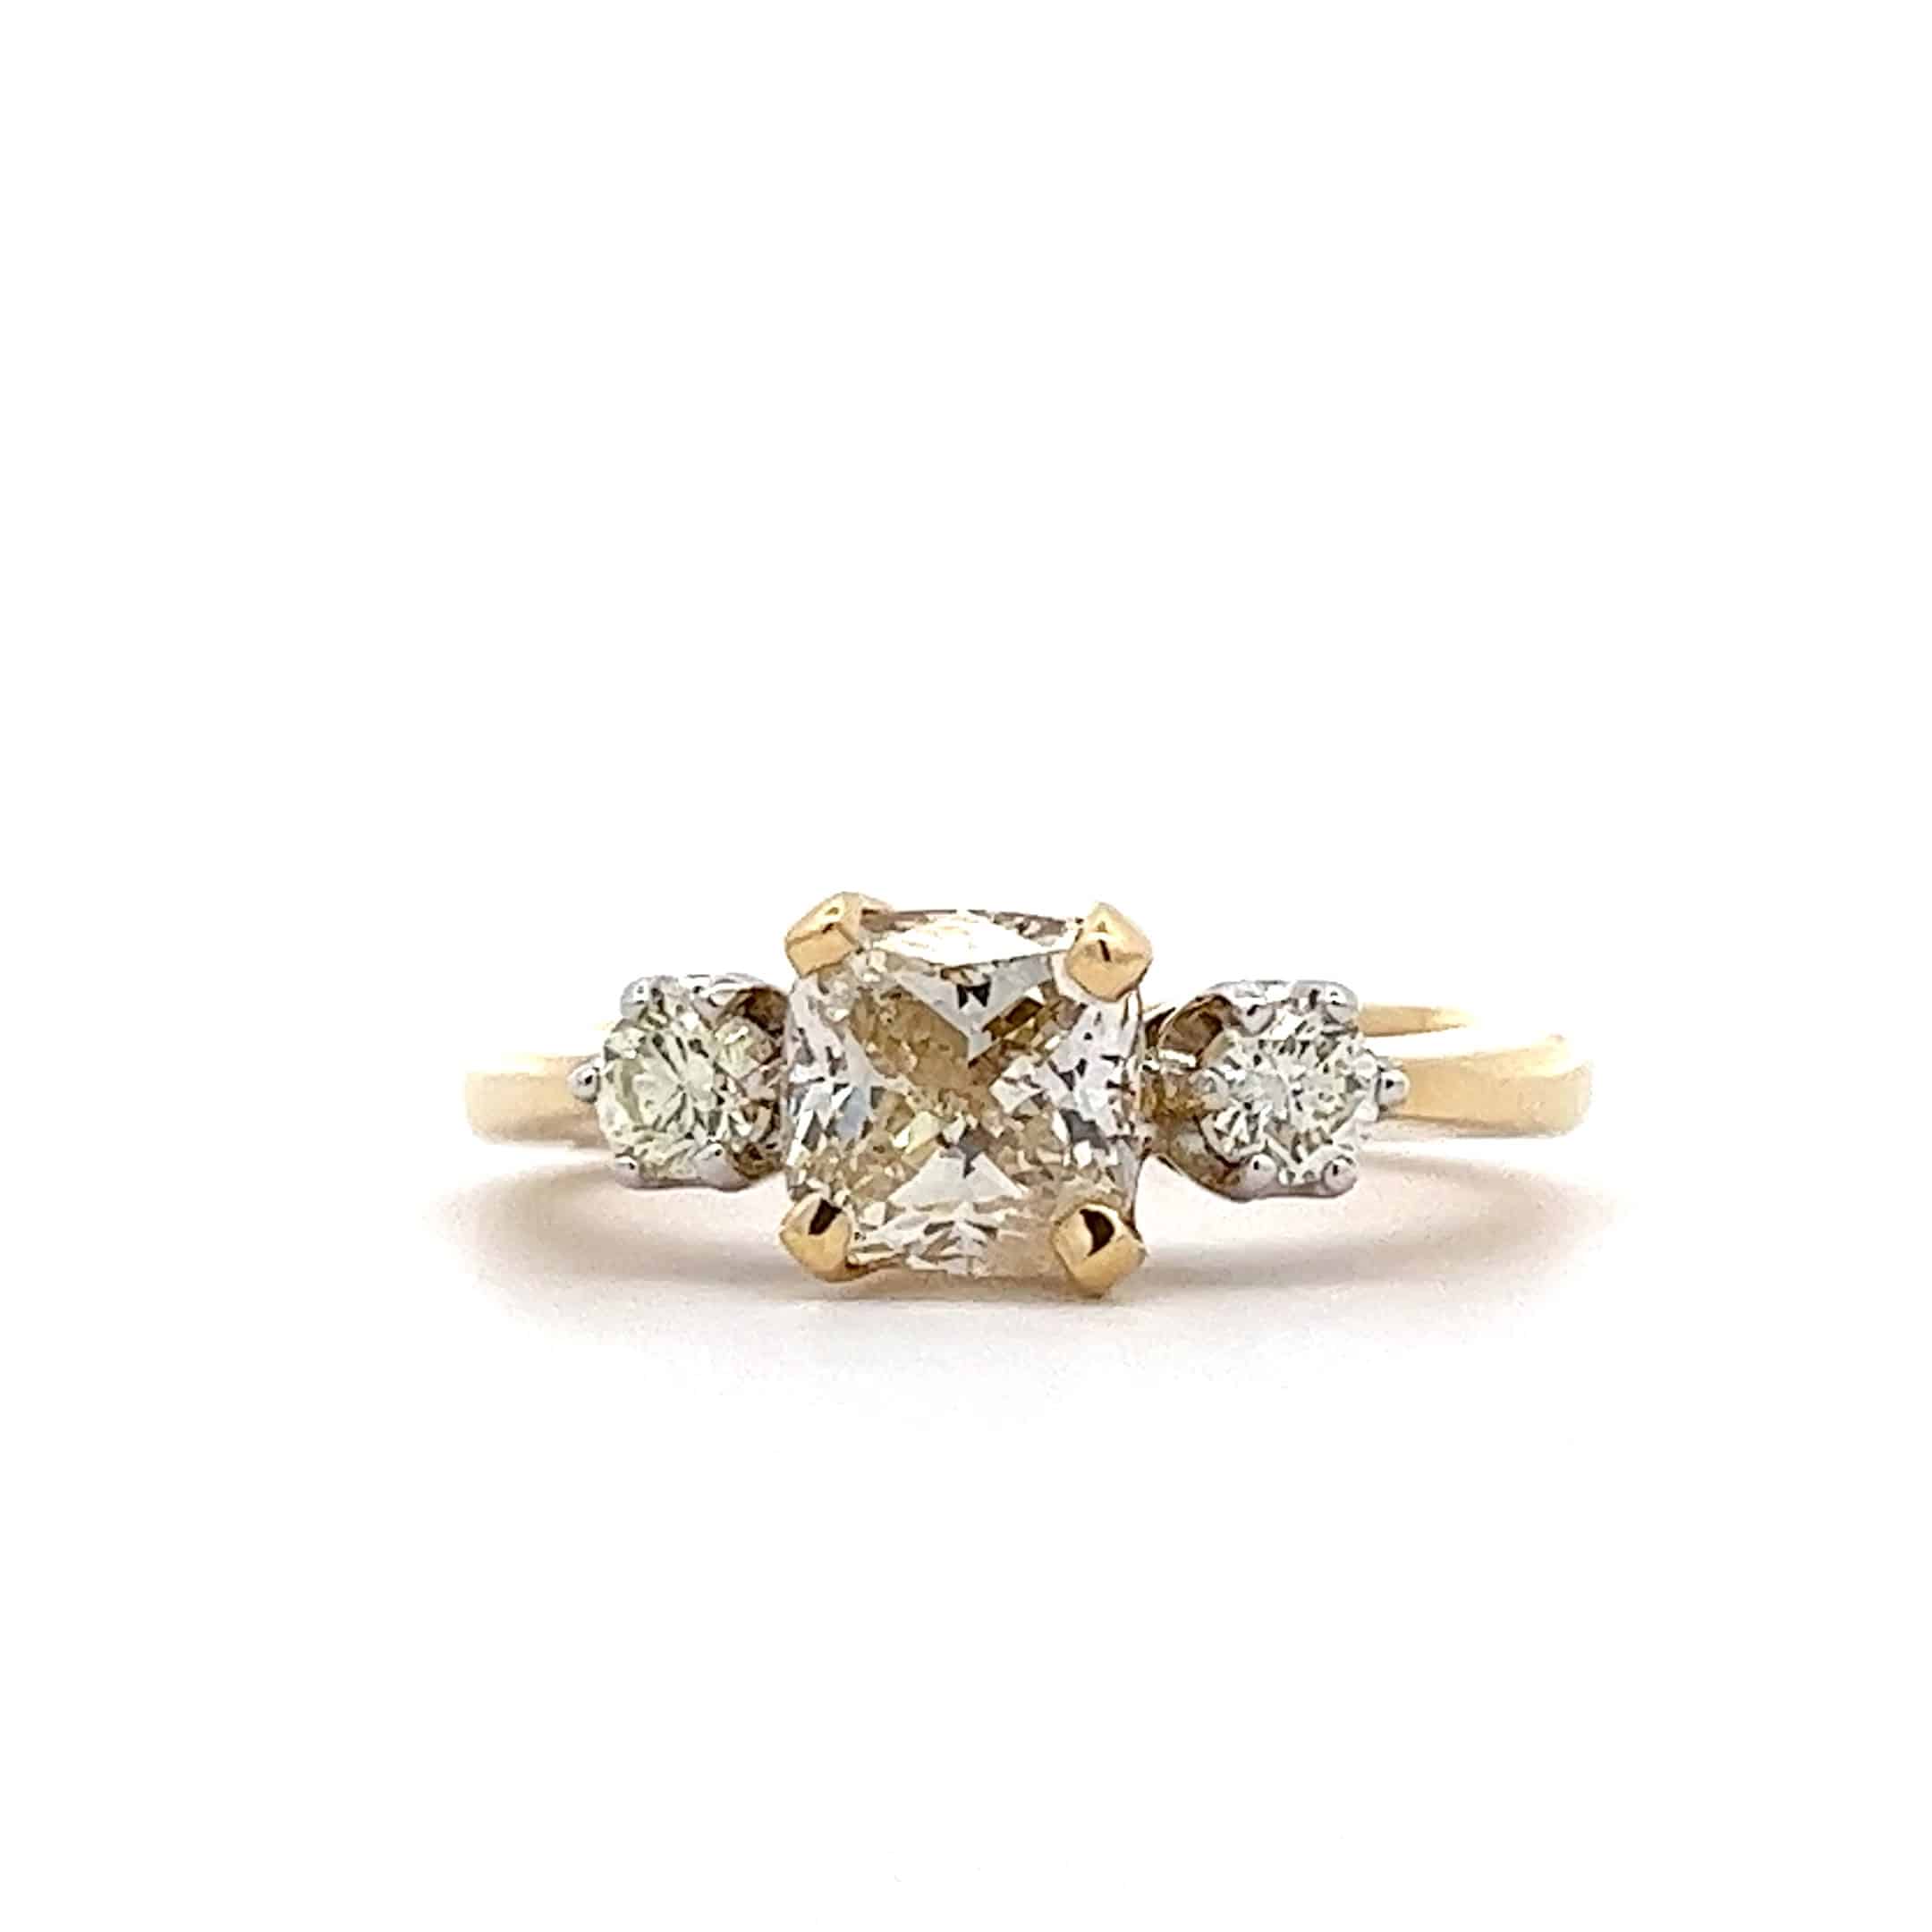 Stunning Preowned 3 Stone Diamond Ring with Radiant Cut Center Stone – 1.52ct Centre Stone